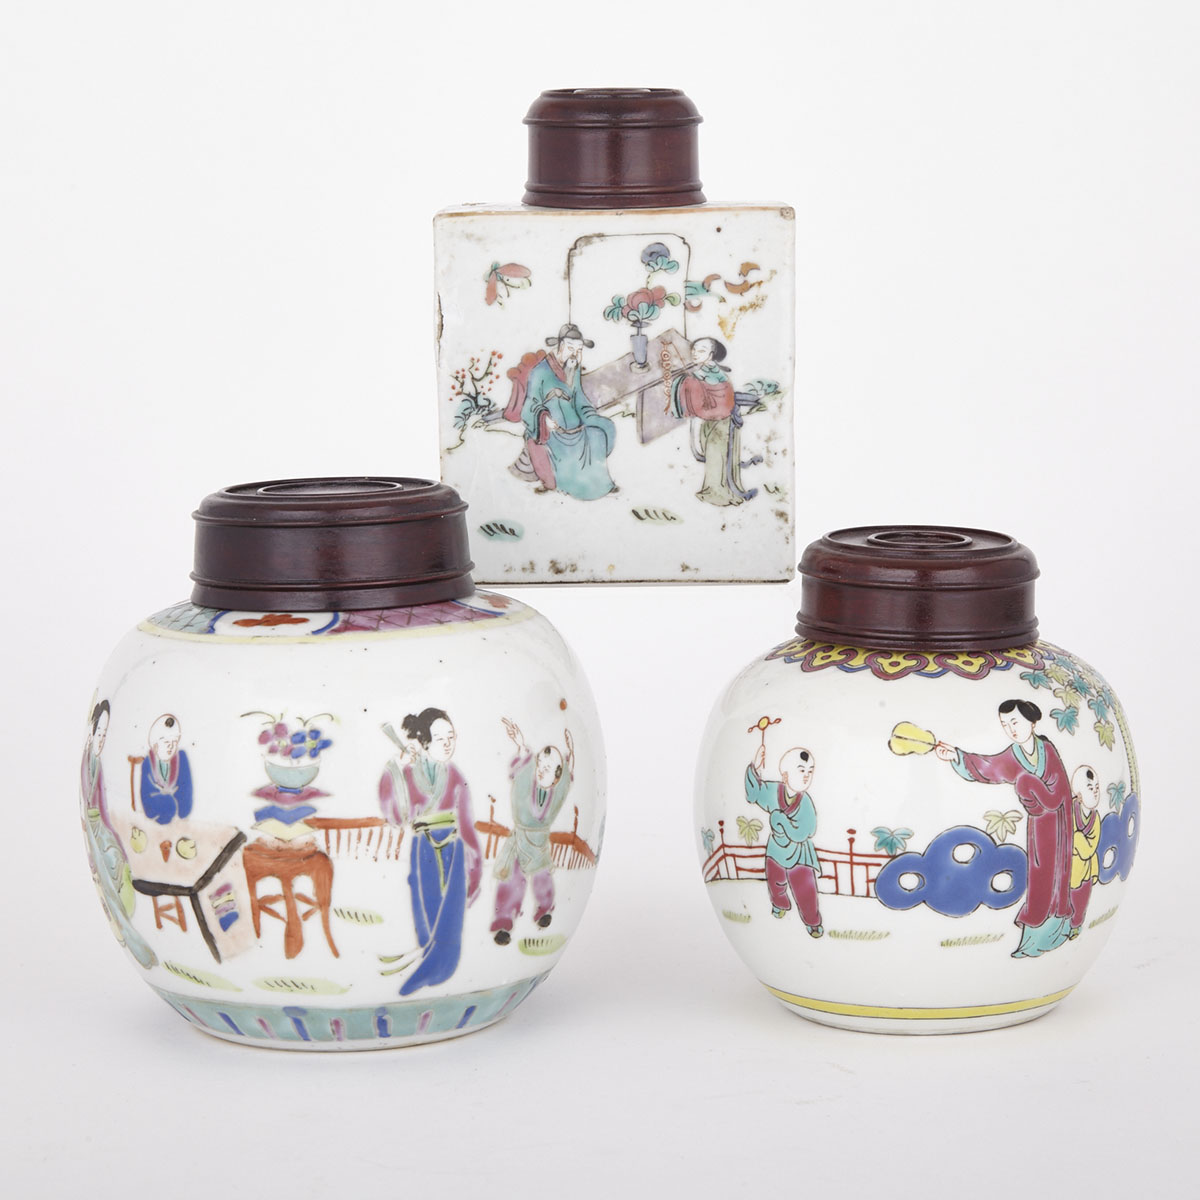 Two Famille Rose Covered Jars and One Tea Bottle, 18th Century 